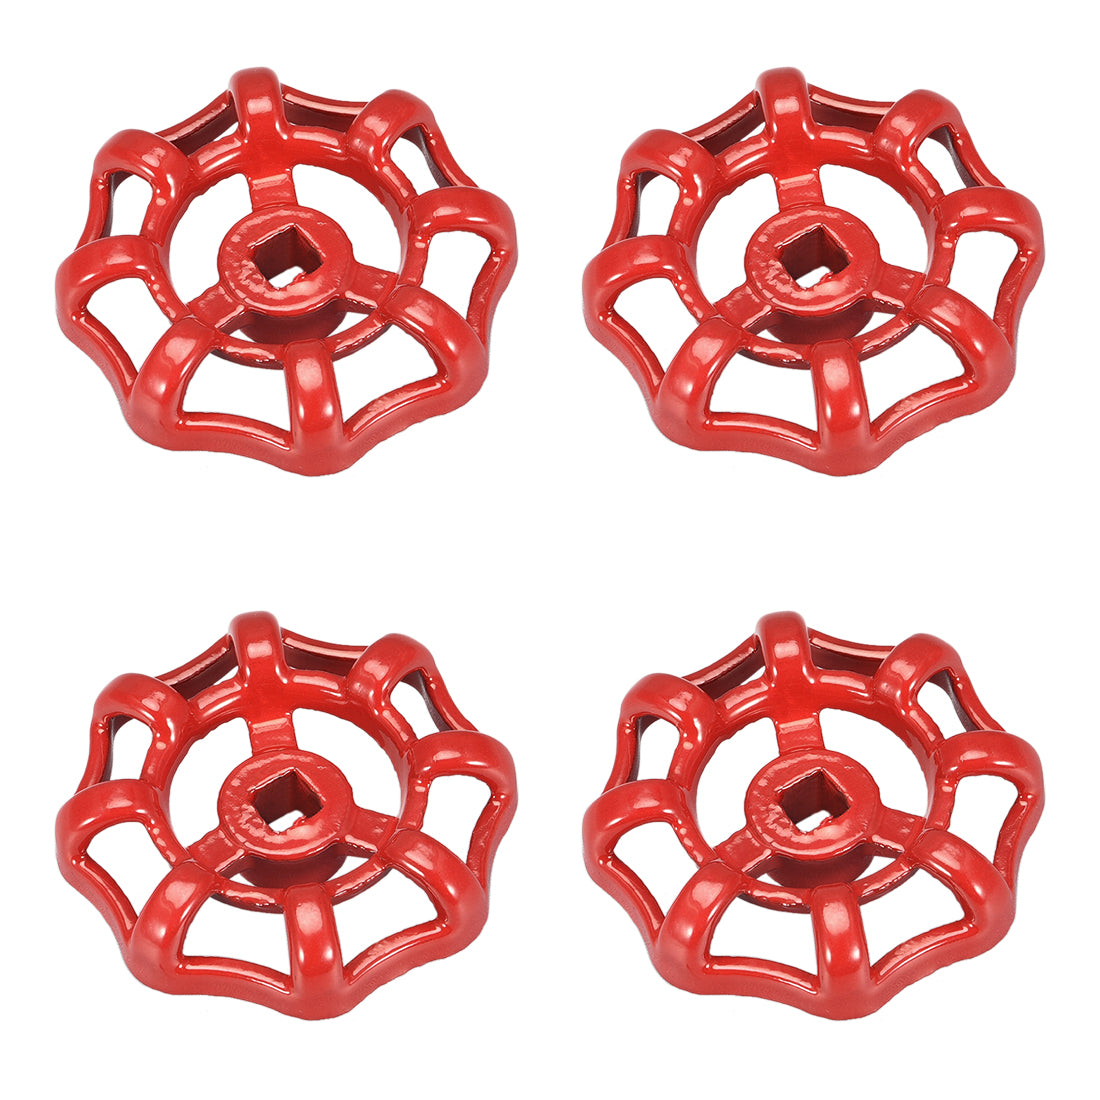 Uxcell Uxcell Round Wheel Handle, Square Broach 6x6mm, Wheel OD 51mm Paint Cast Steel Red 4Pcs